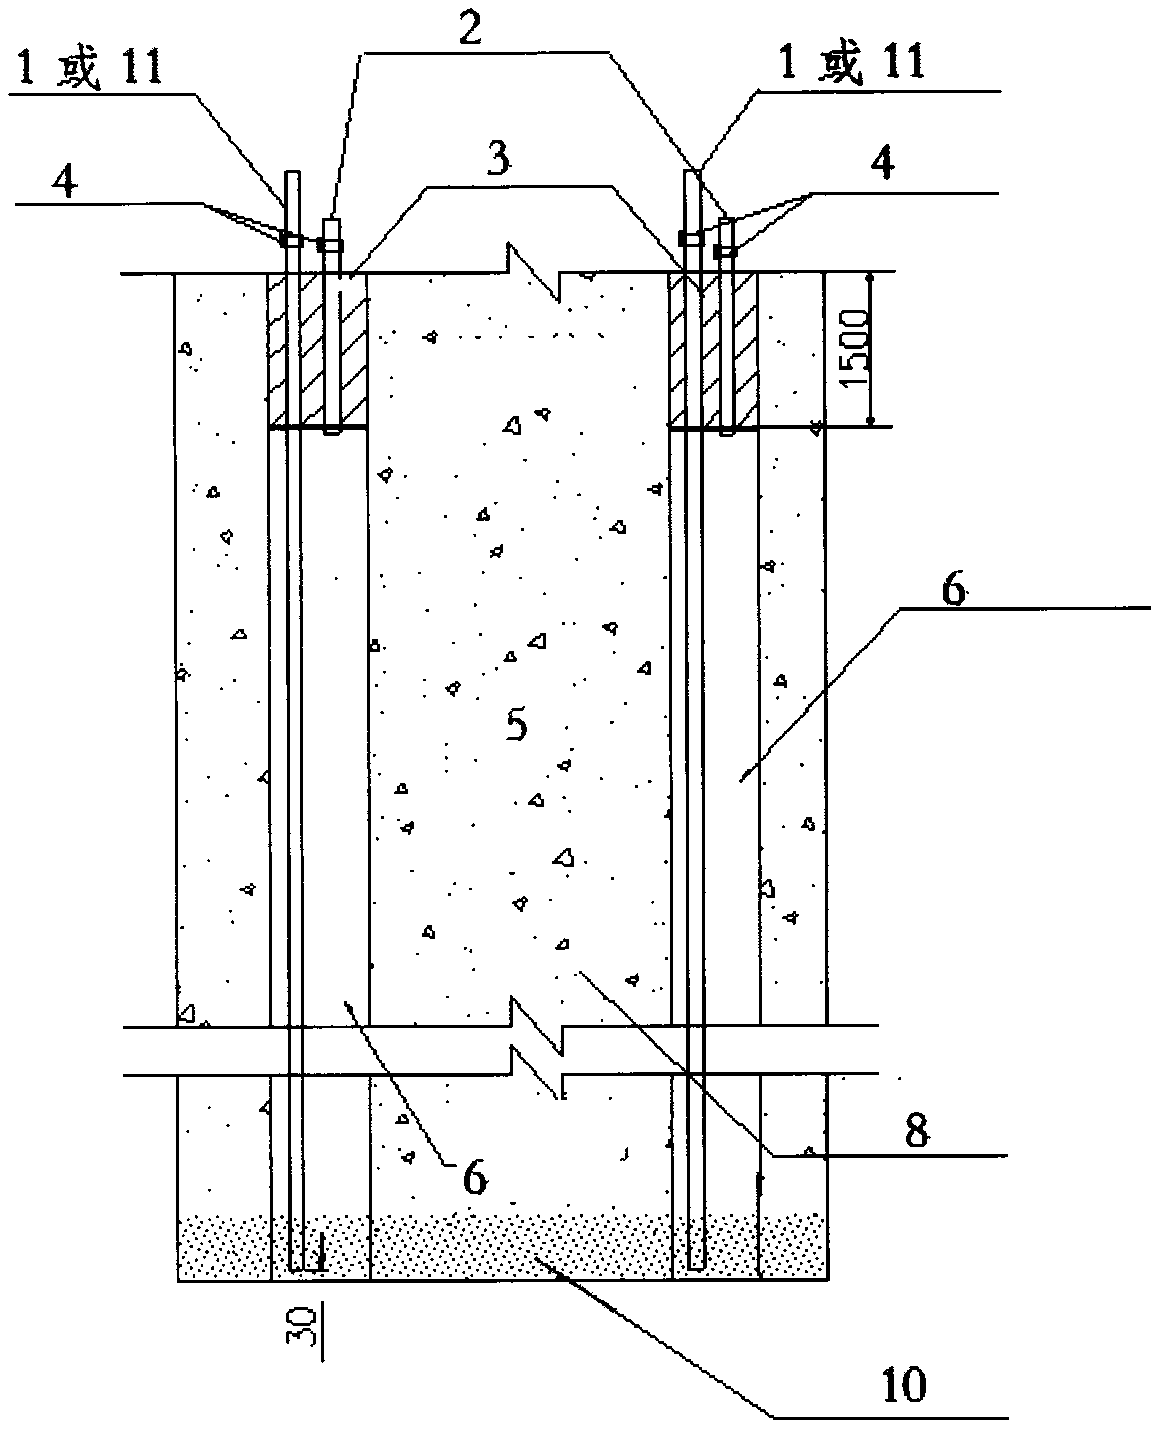 Construction method for the treatment of pile body collapse hole or pile bottom sediment quality defect of rotary excavated cast-in-place pile